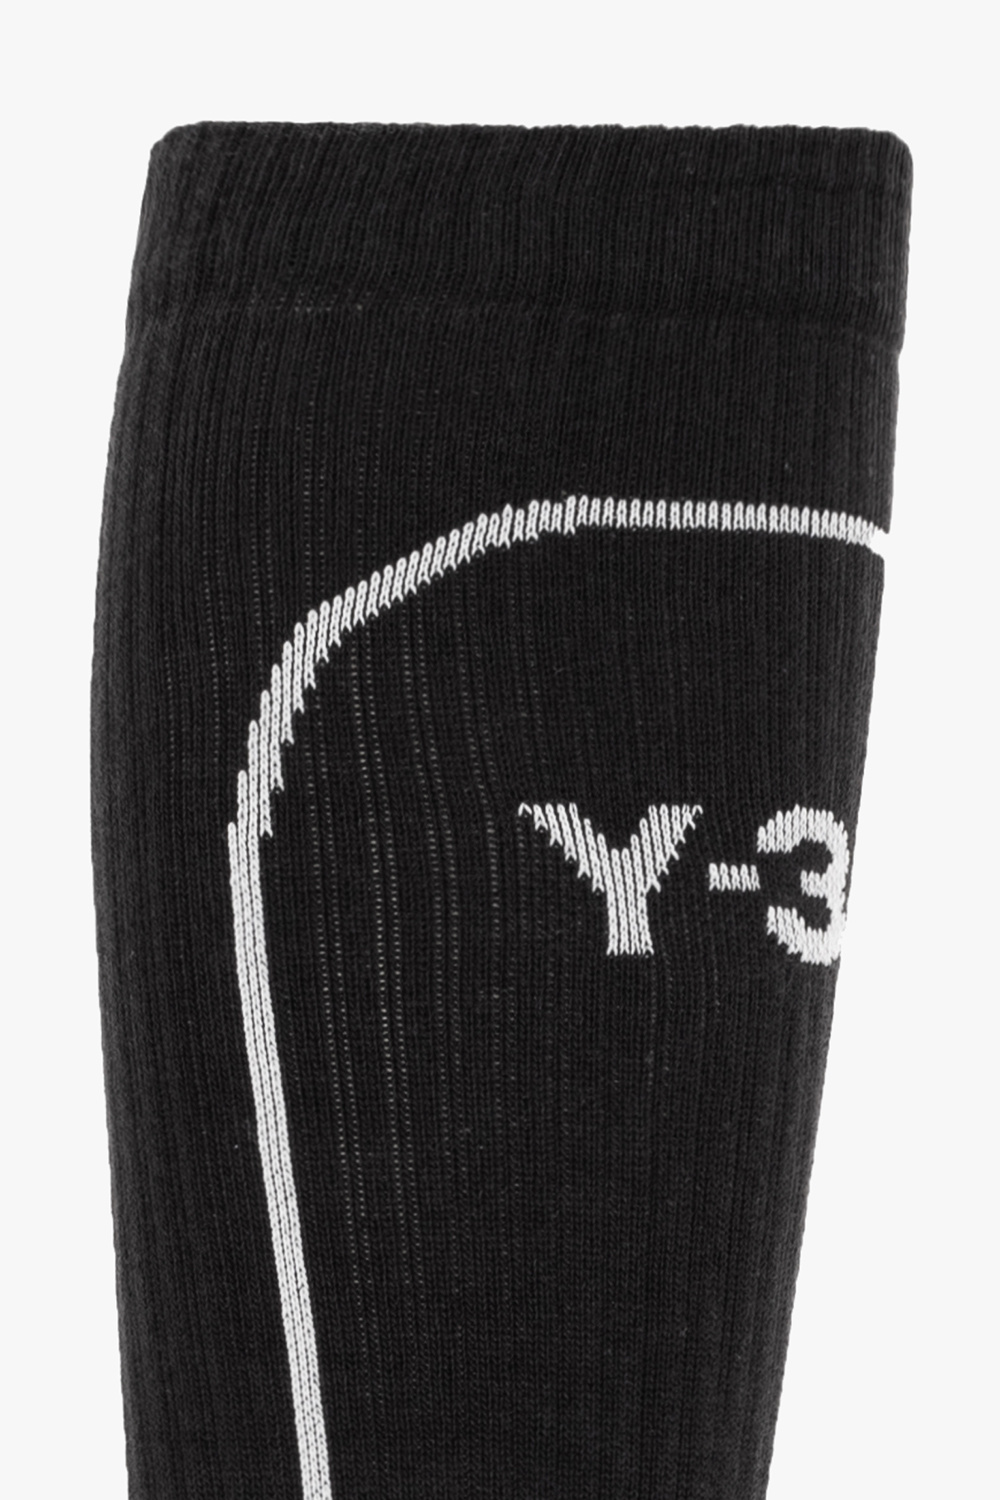 Y-3 Yohji Yamamoto Lets keep in touch